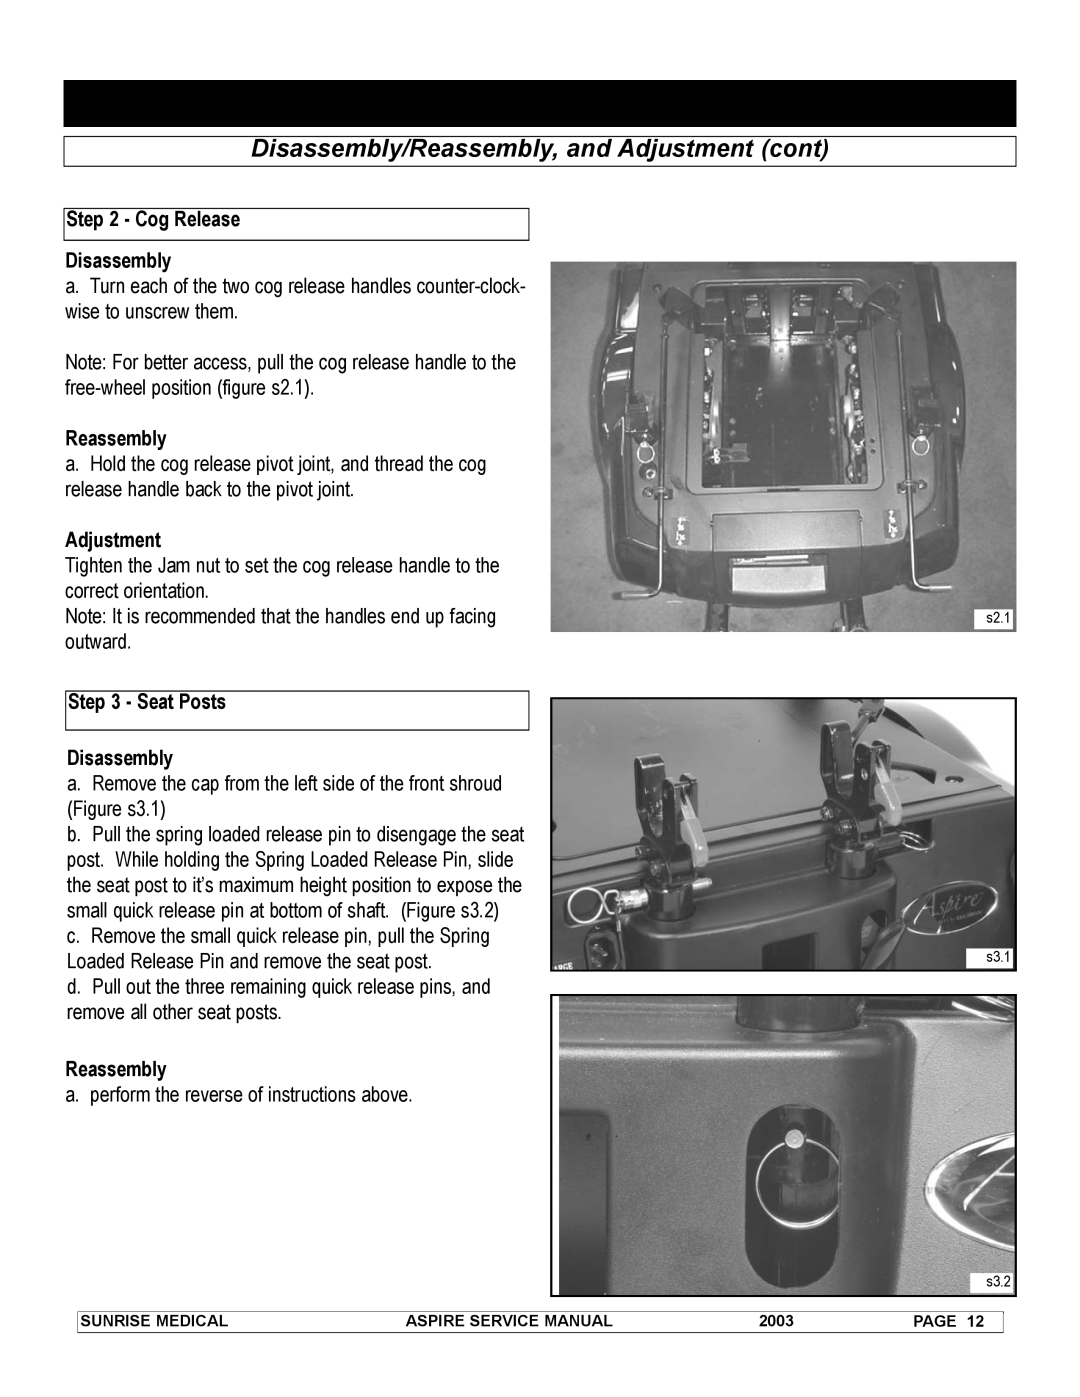 Sunrise Medical 931157 service manual Disassembly/Reassembly, and Adjustment cont 